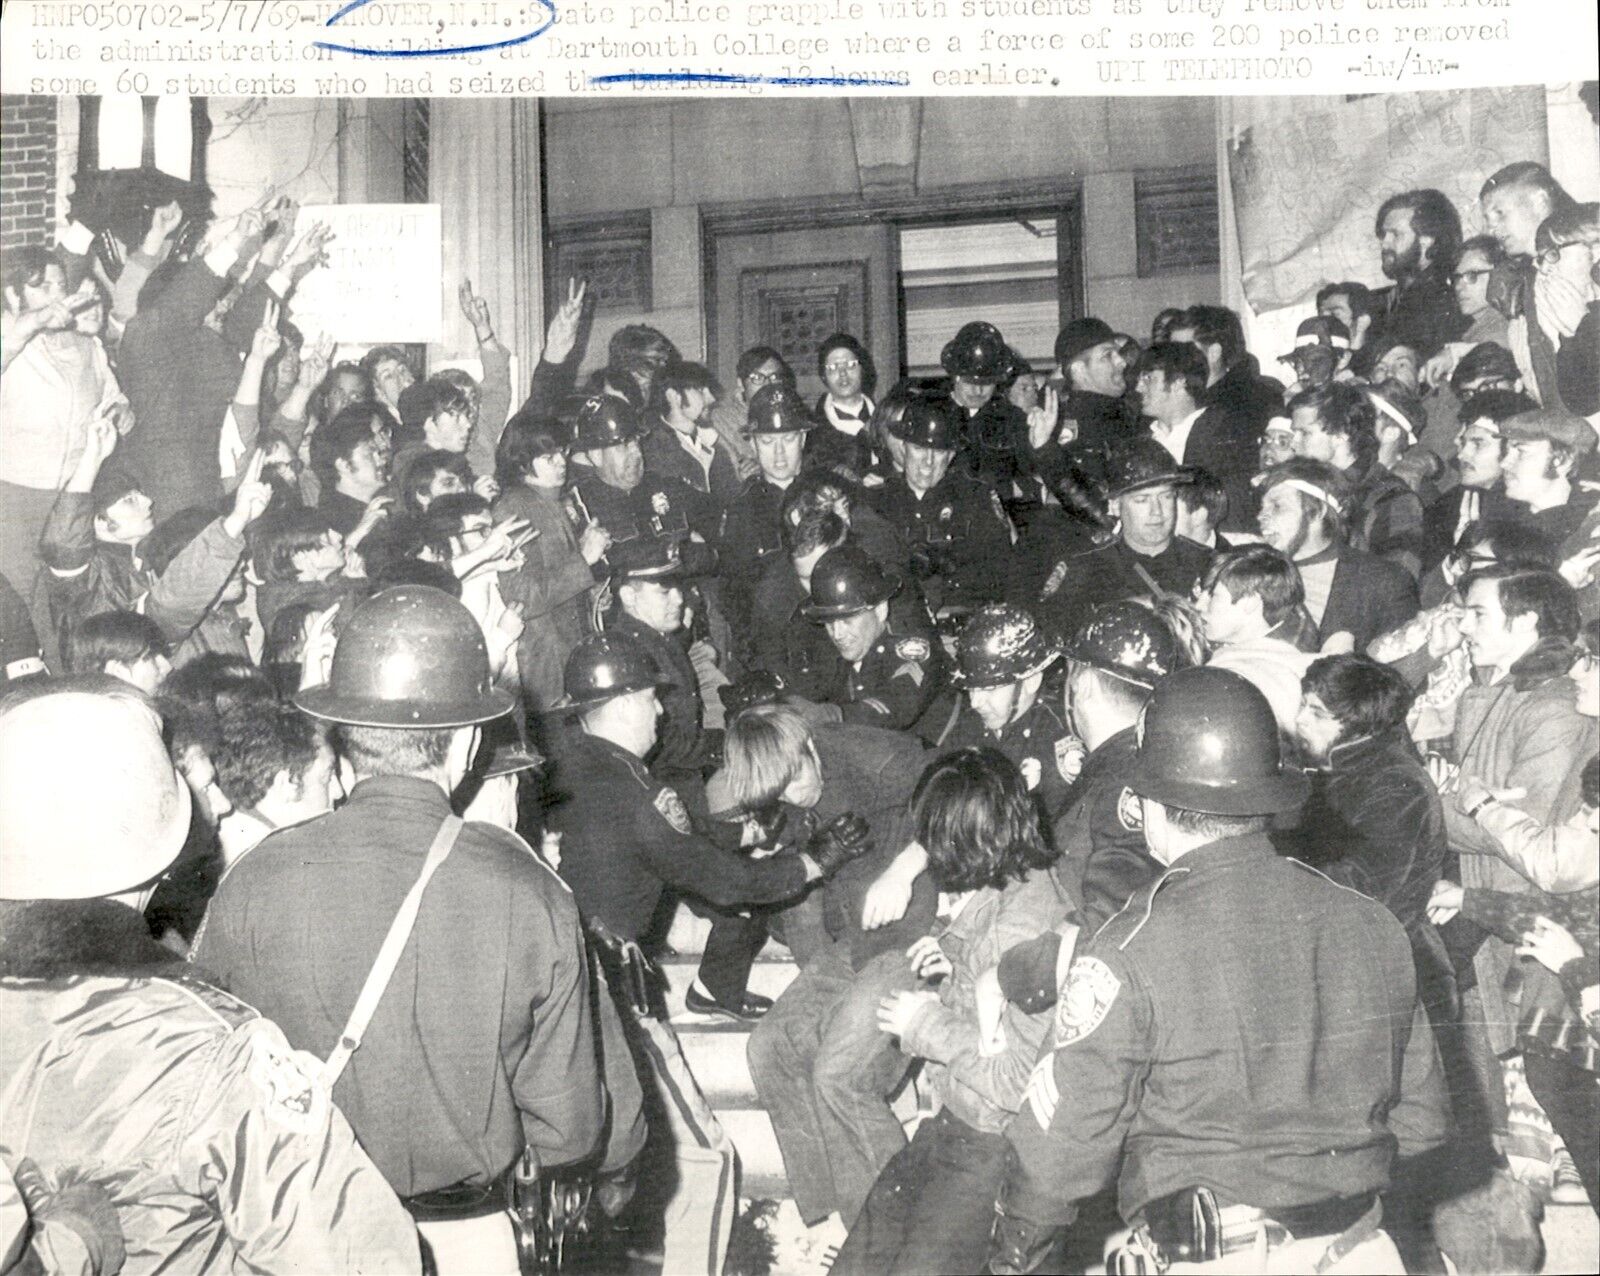 LG76 1969 Wire Photo DARTMOUTH COLLEGE STUDENTS CLASH WITH COPS @ ROTC PROTEST